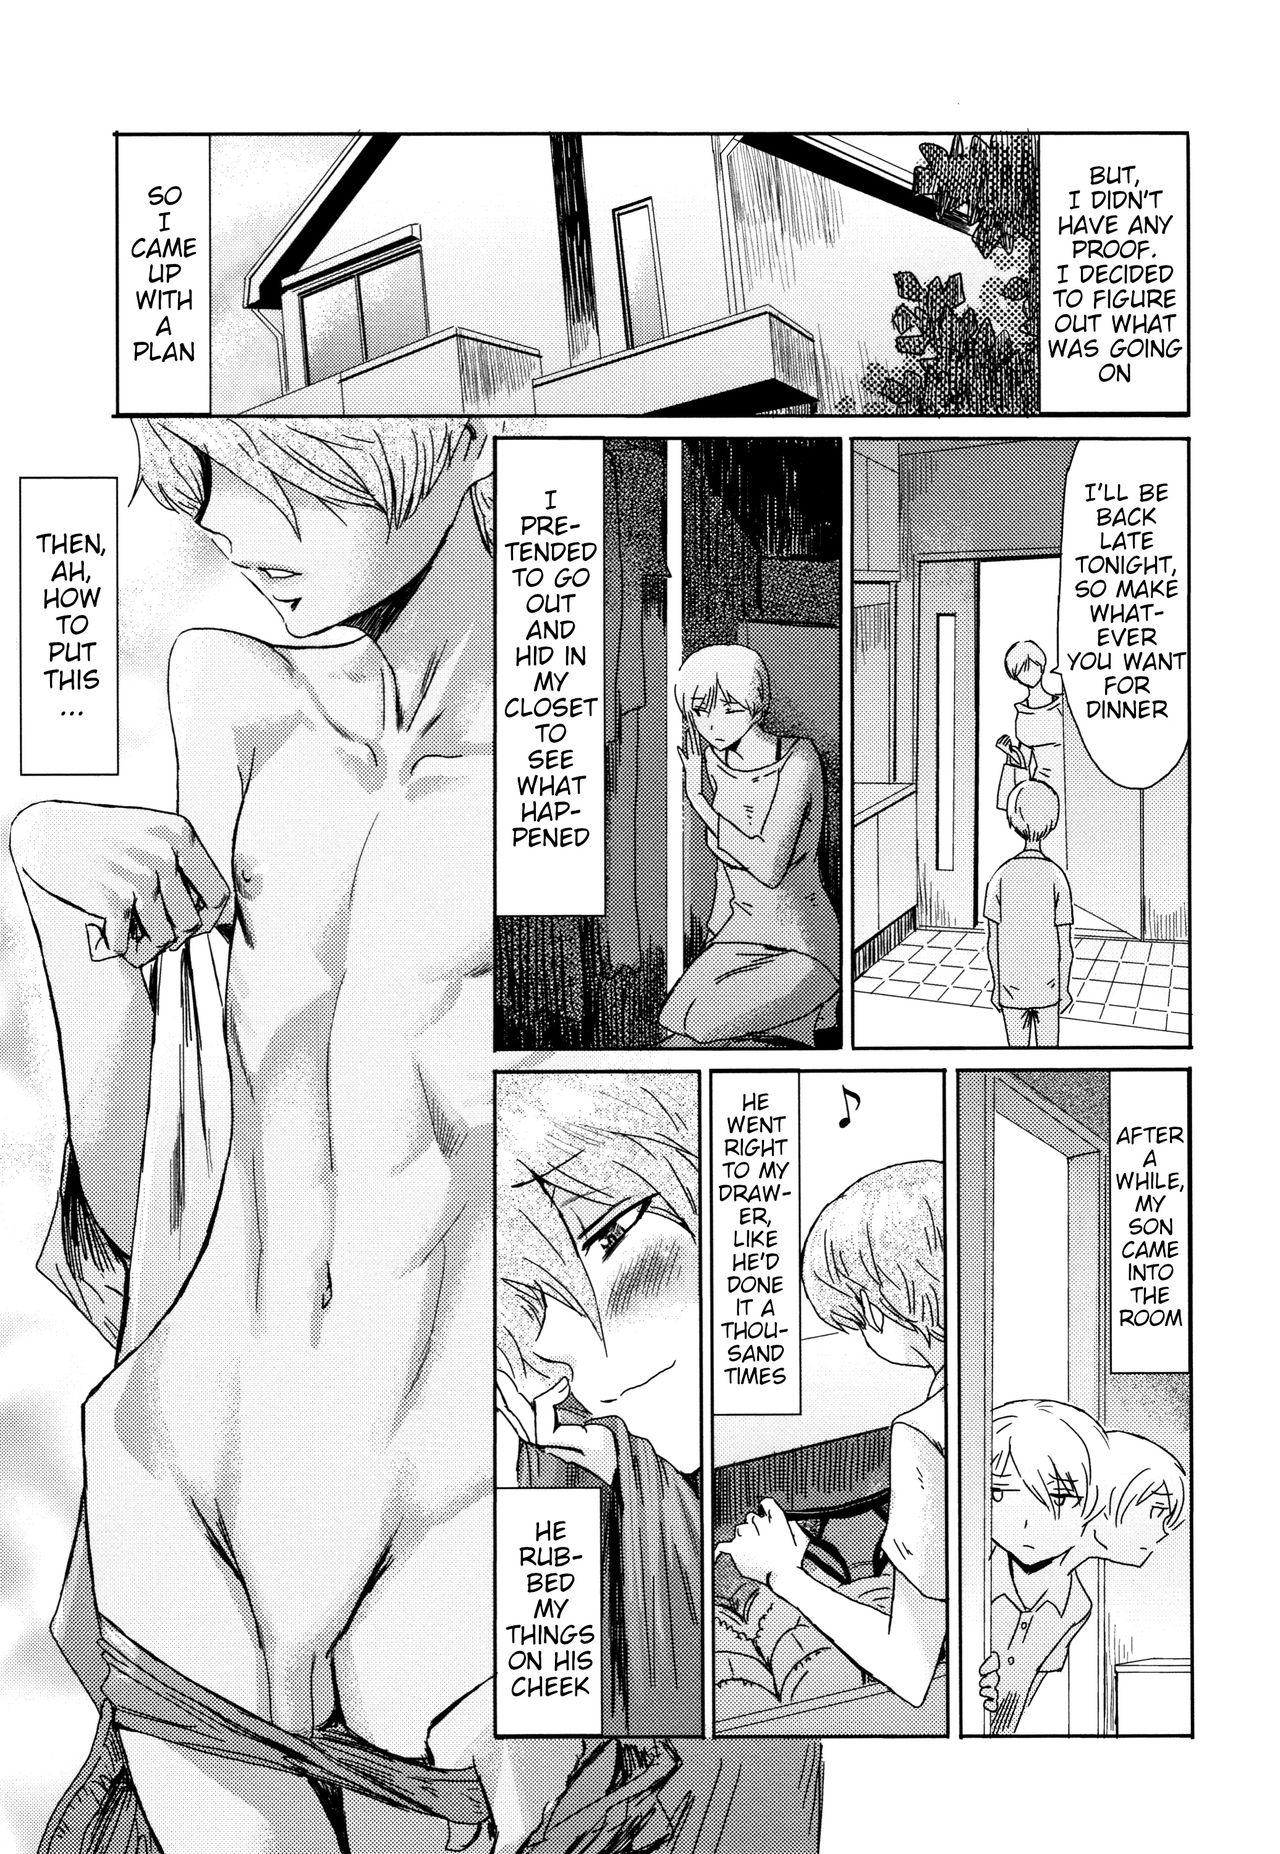 Putinha Good for Eating! Immoral Fruit 1st & 2nd Parts Straight Porn - Page 3